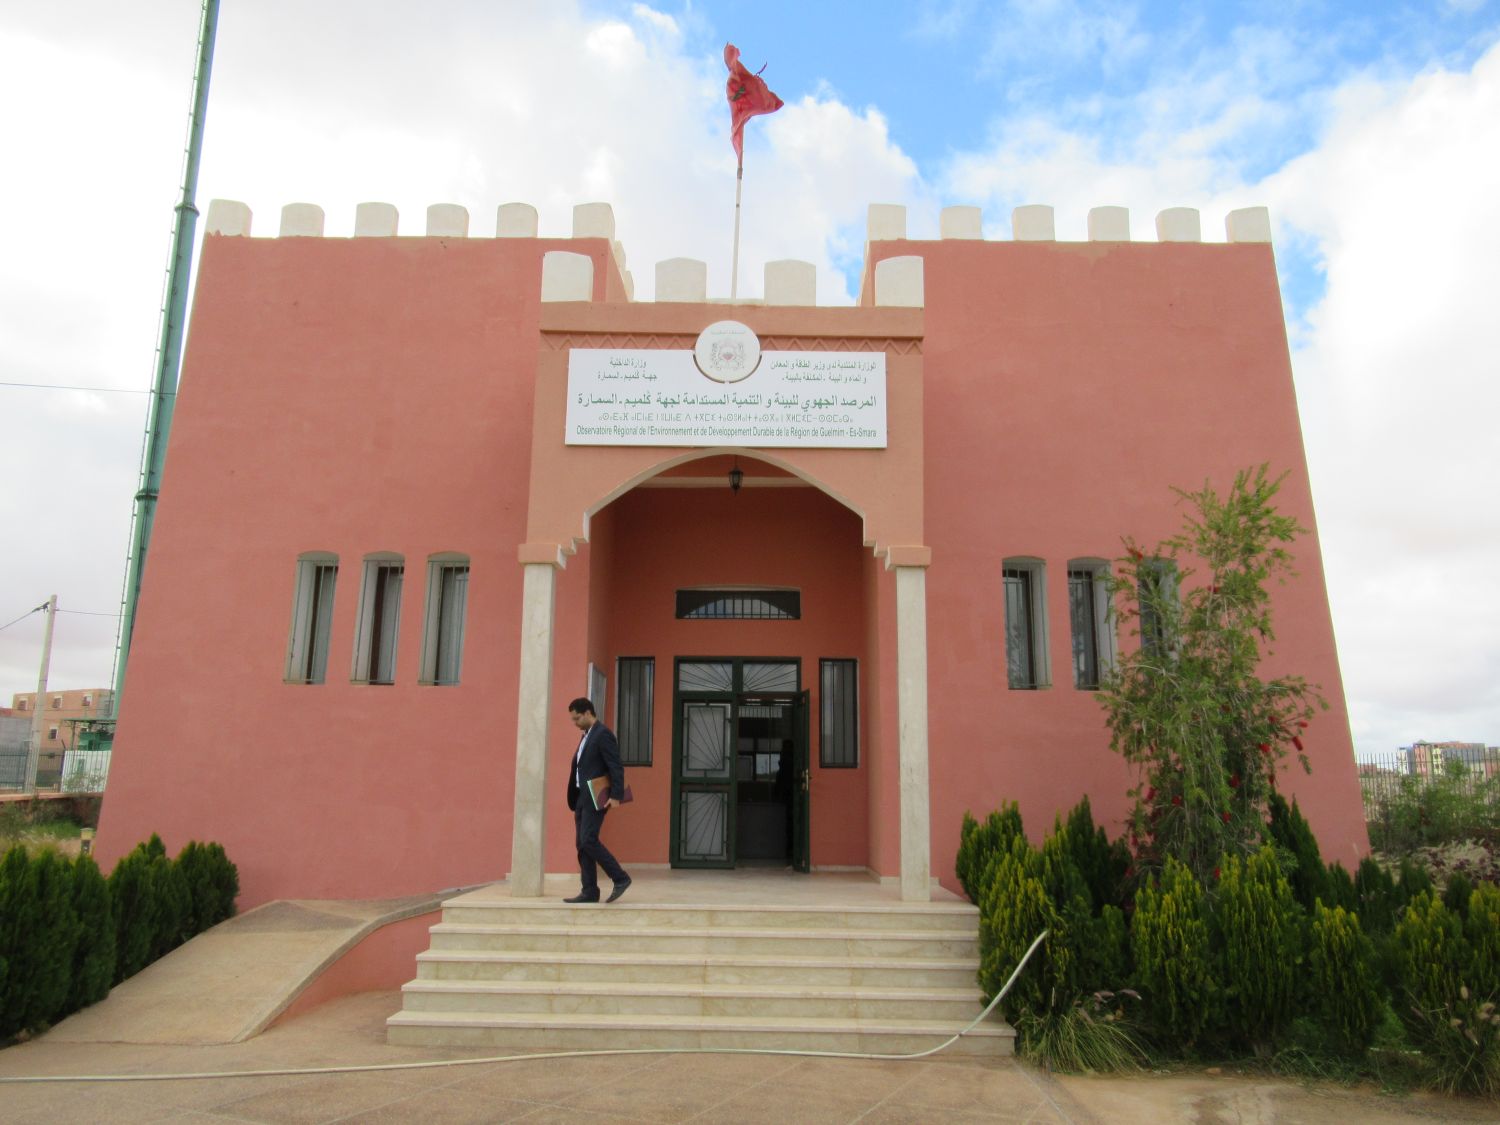 Agriculture ministry in Guelmim.